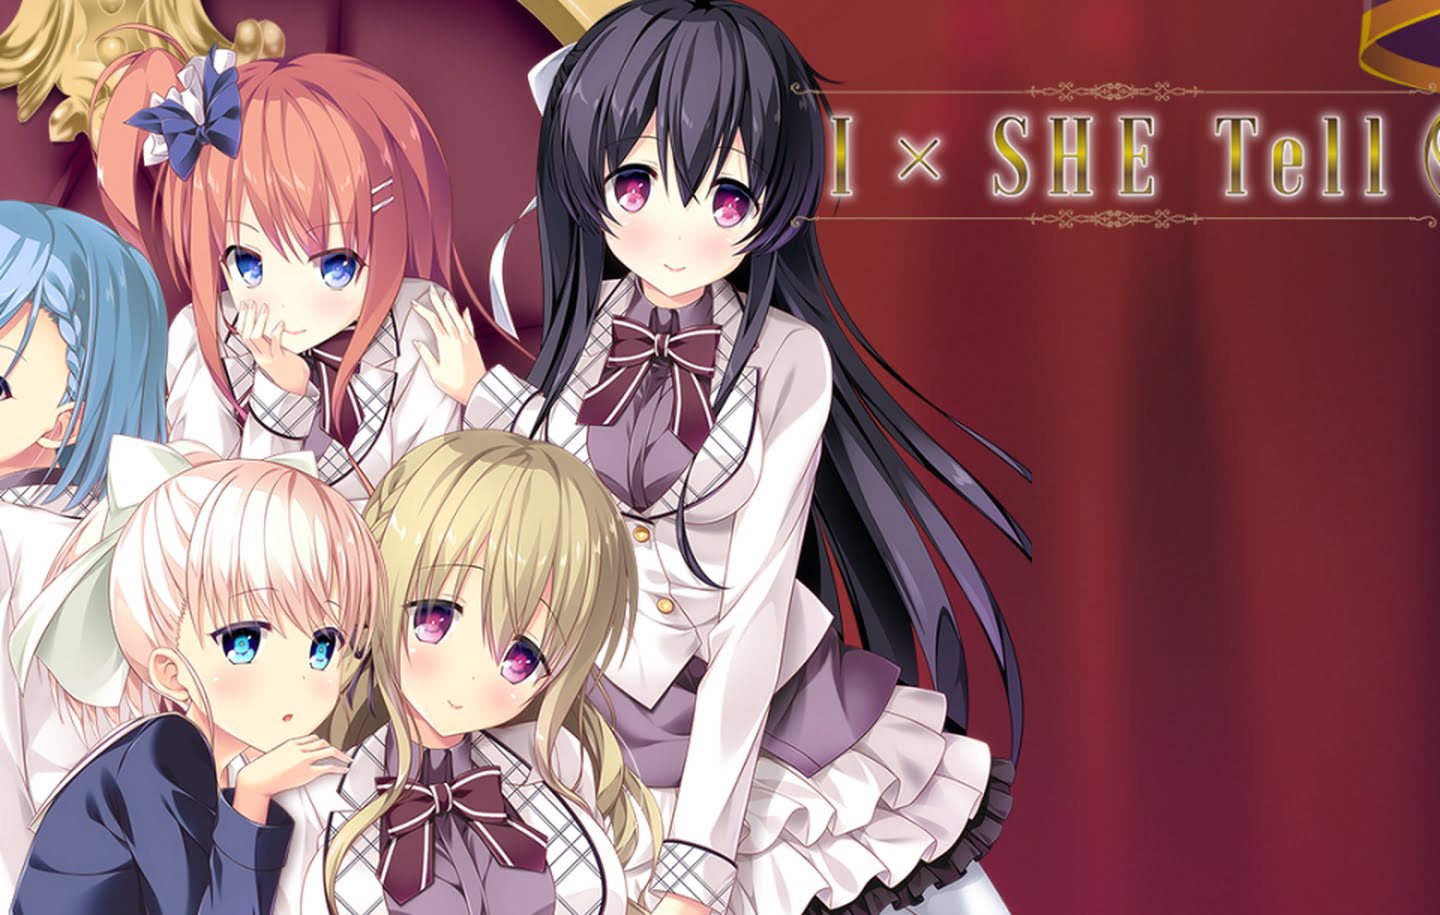 IxSHE Tell porn xxx game download cover